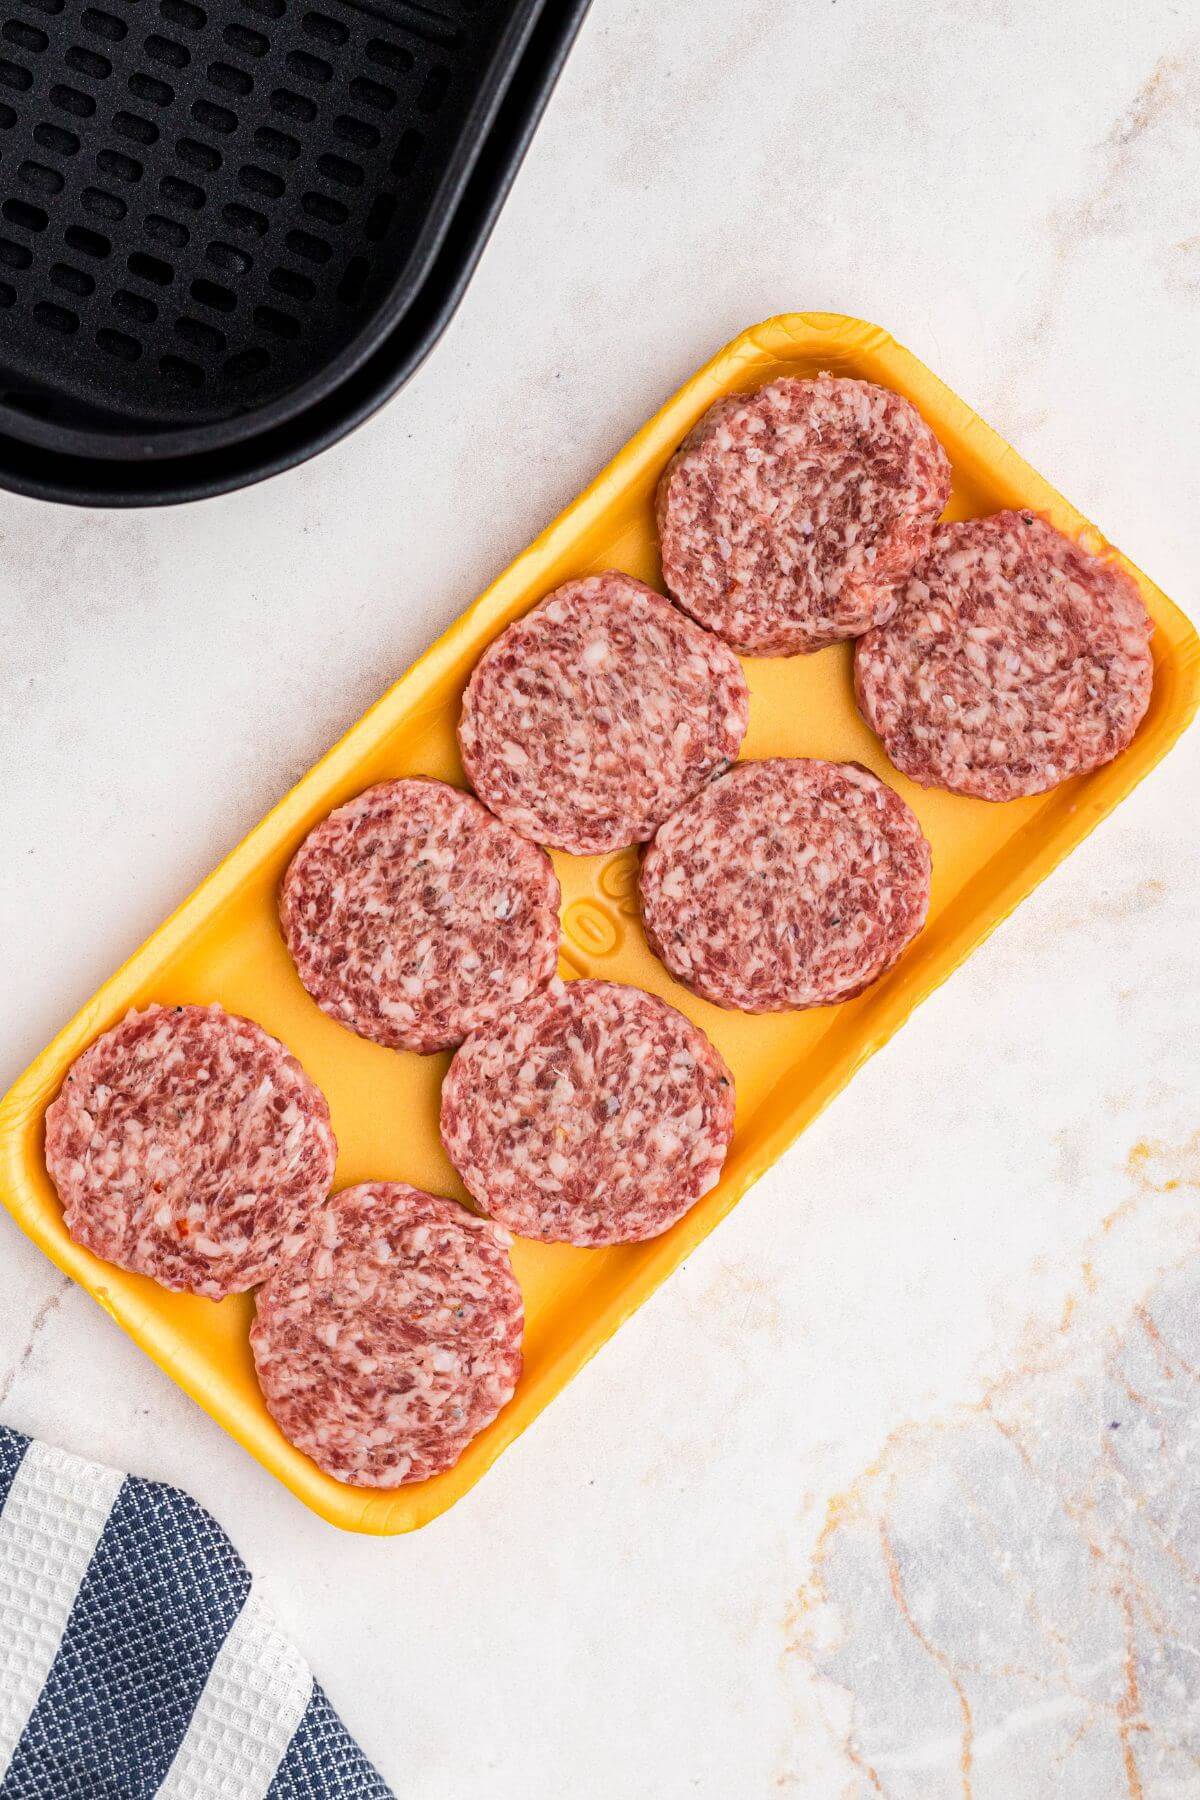 uncooked sausage patties in a yellow Styrofoam container on a marble table. 